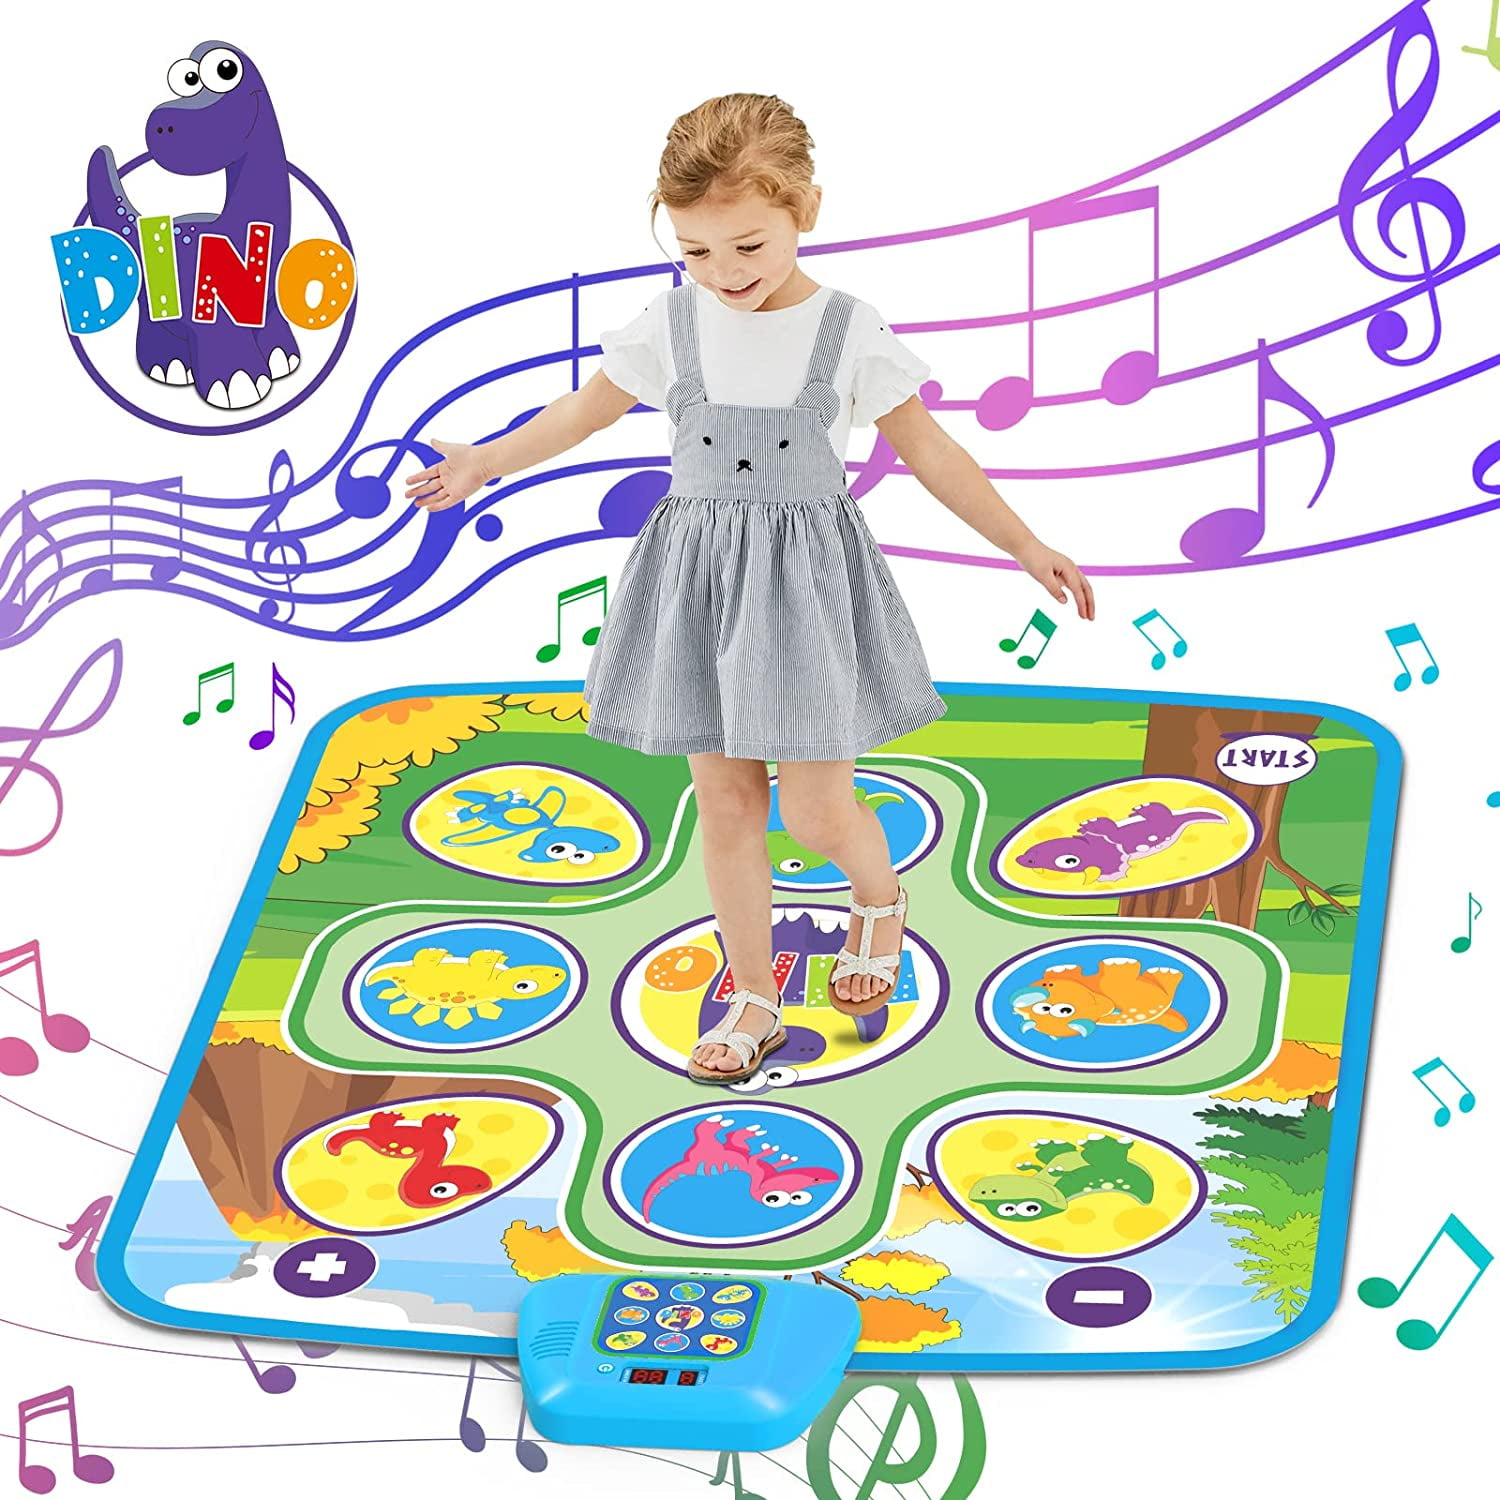 Dance Mat Toys Gift for Kids Girls LIight up Musical Mat for 3-12 Years Old Girls Dance Game Pad Toddler Children Girls Birthday Present Christmas Princess Party 6 Game Modes 5 Challenge Levels 